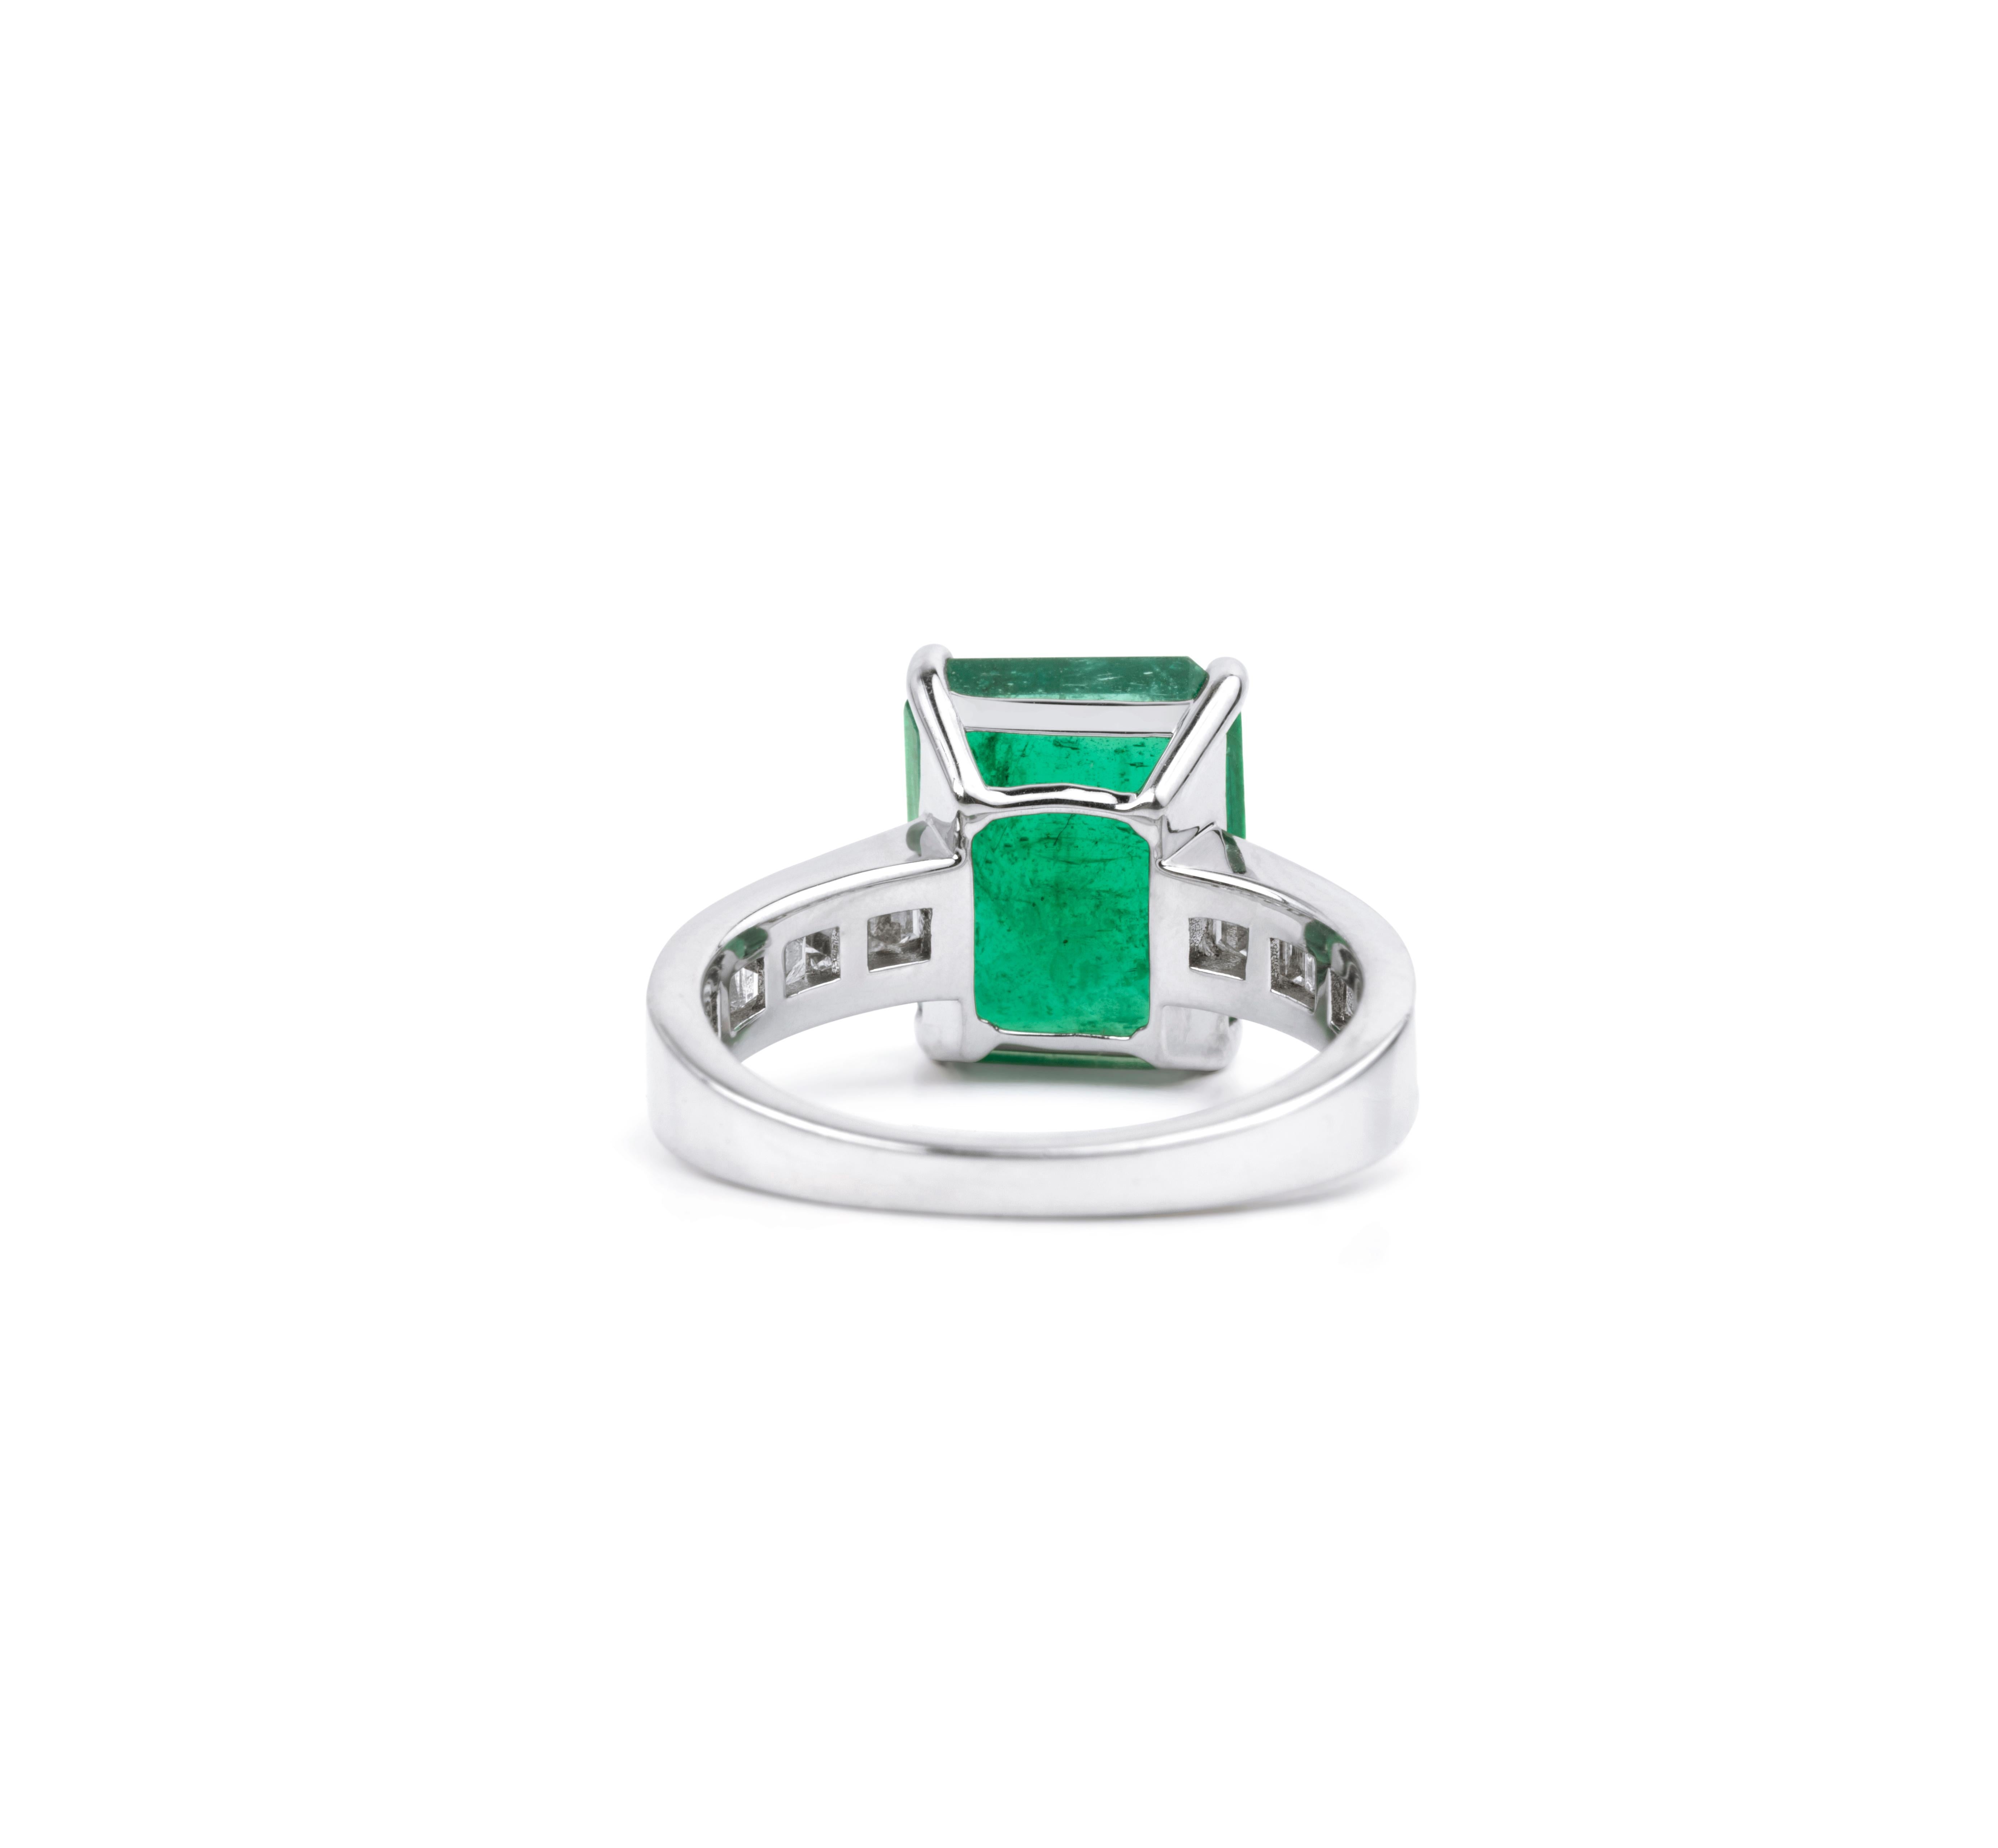 4.5 Carat Natural Emerald Diamond Cocktail Engagement Ring 18k White Gold In New Condition For Sale In Jaipur, RJ